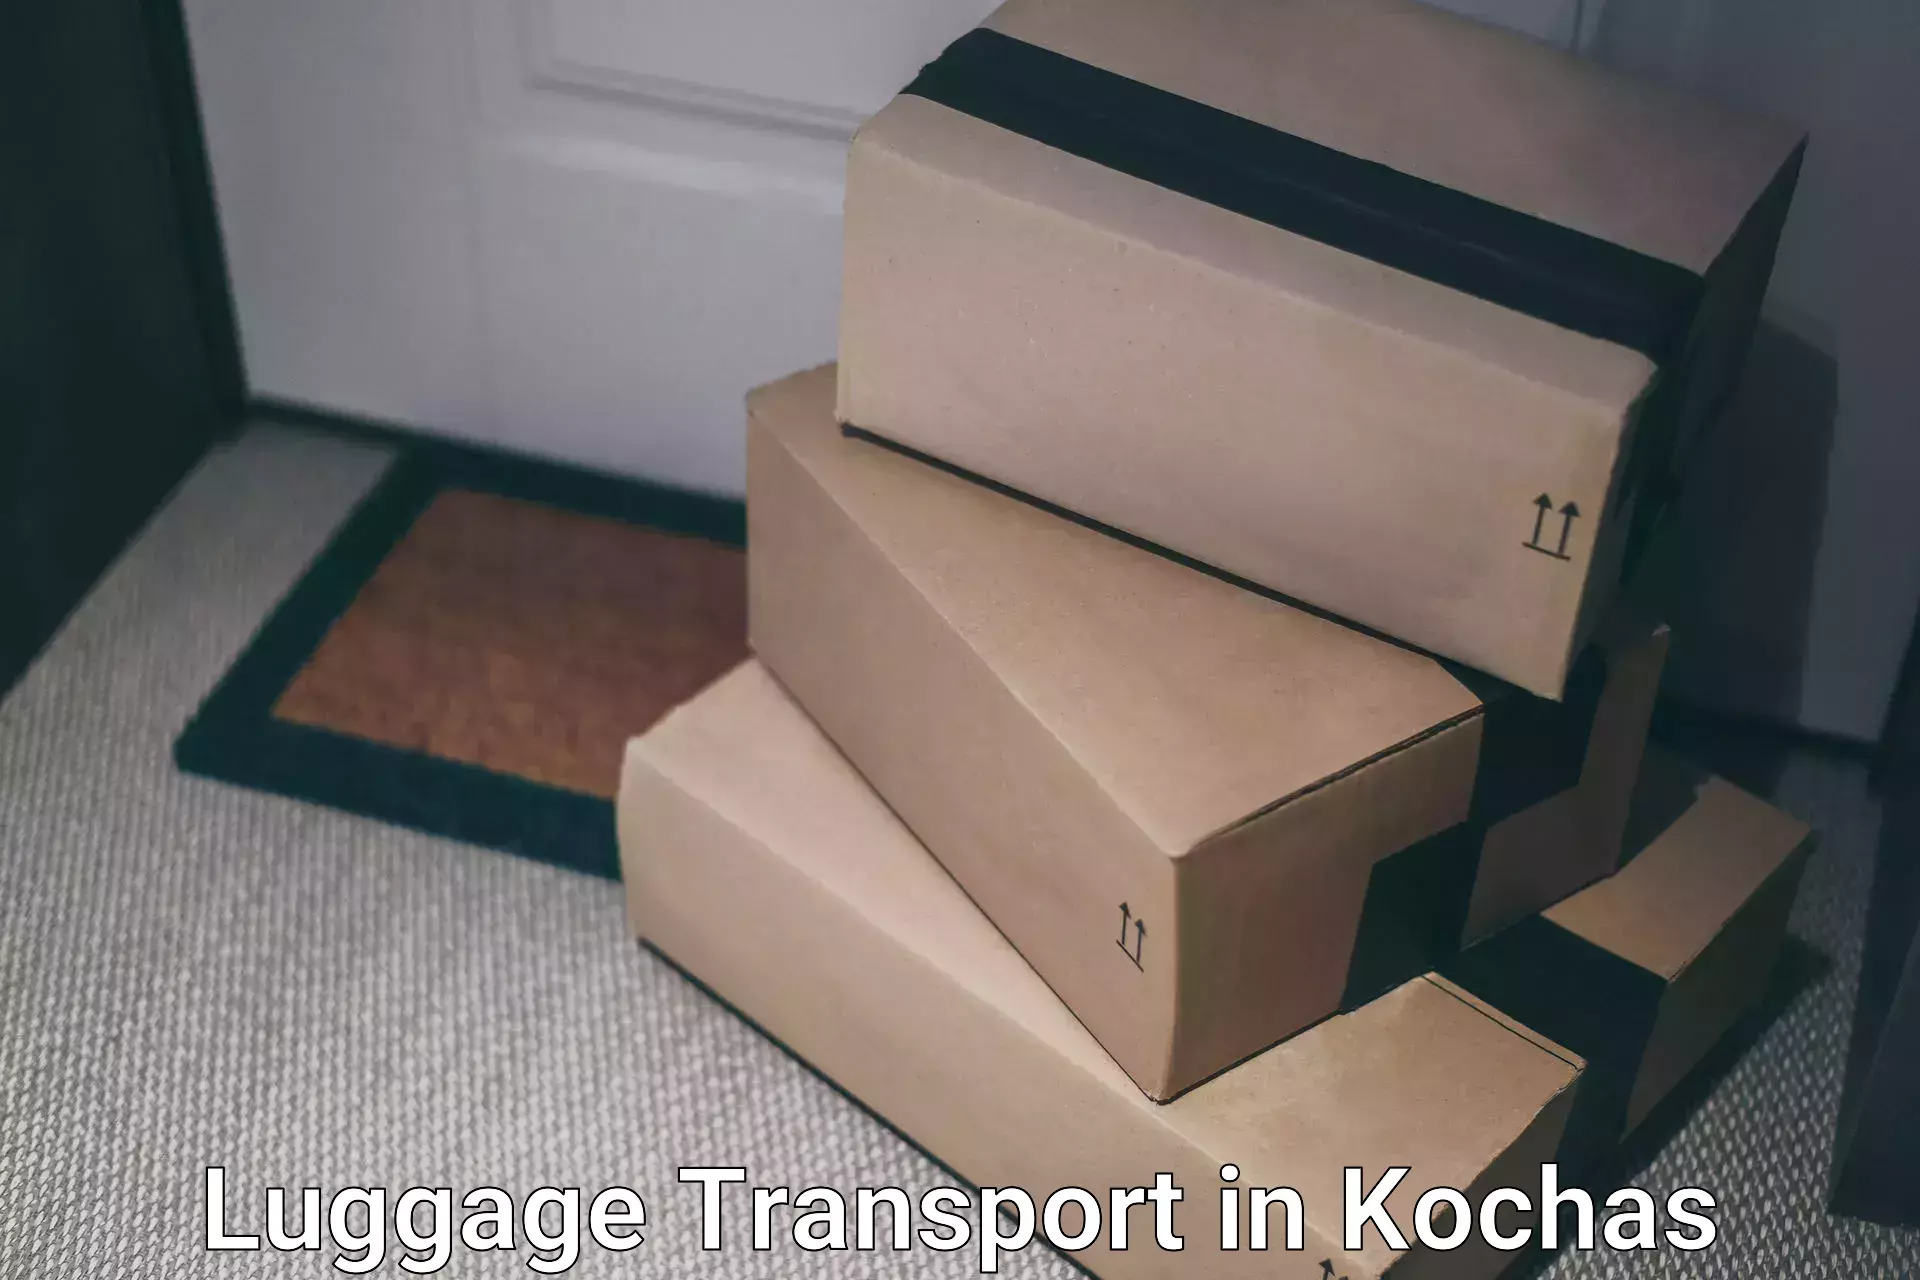 Baggage delivery scheduling in Kochas